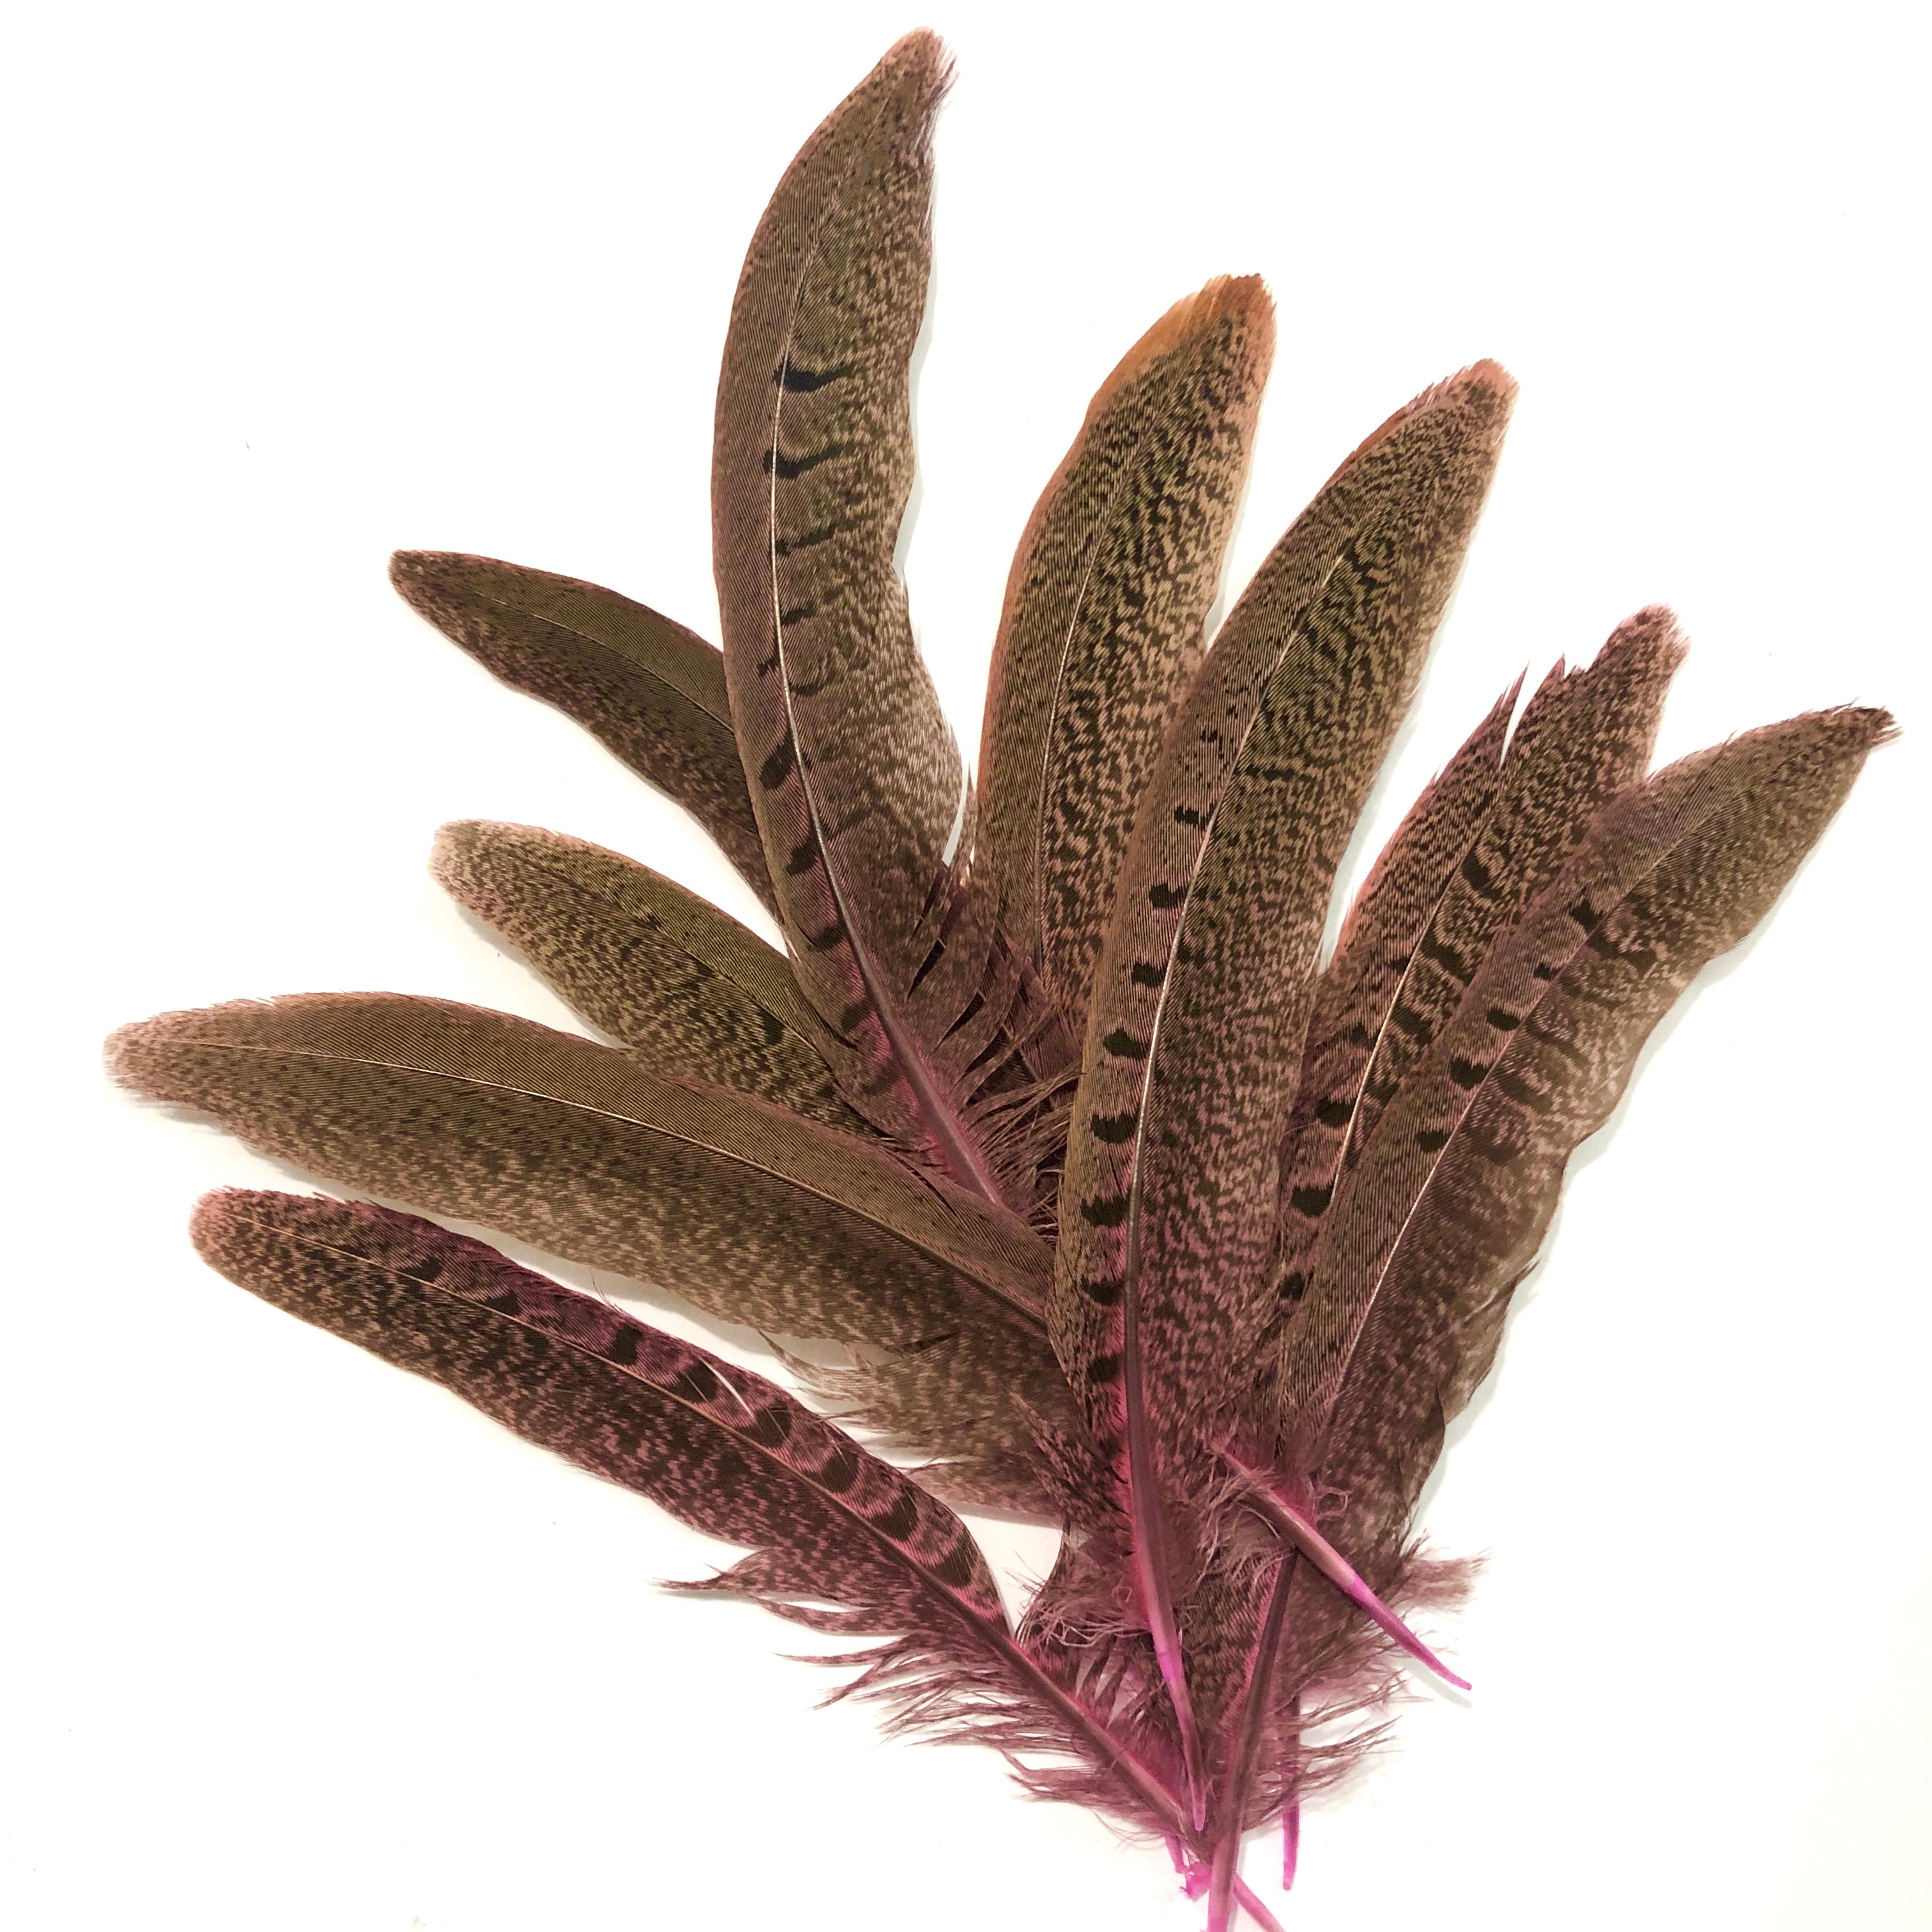 Under 6" Ringneck Pheasant Tail Feather x 10 pcs - Pink